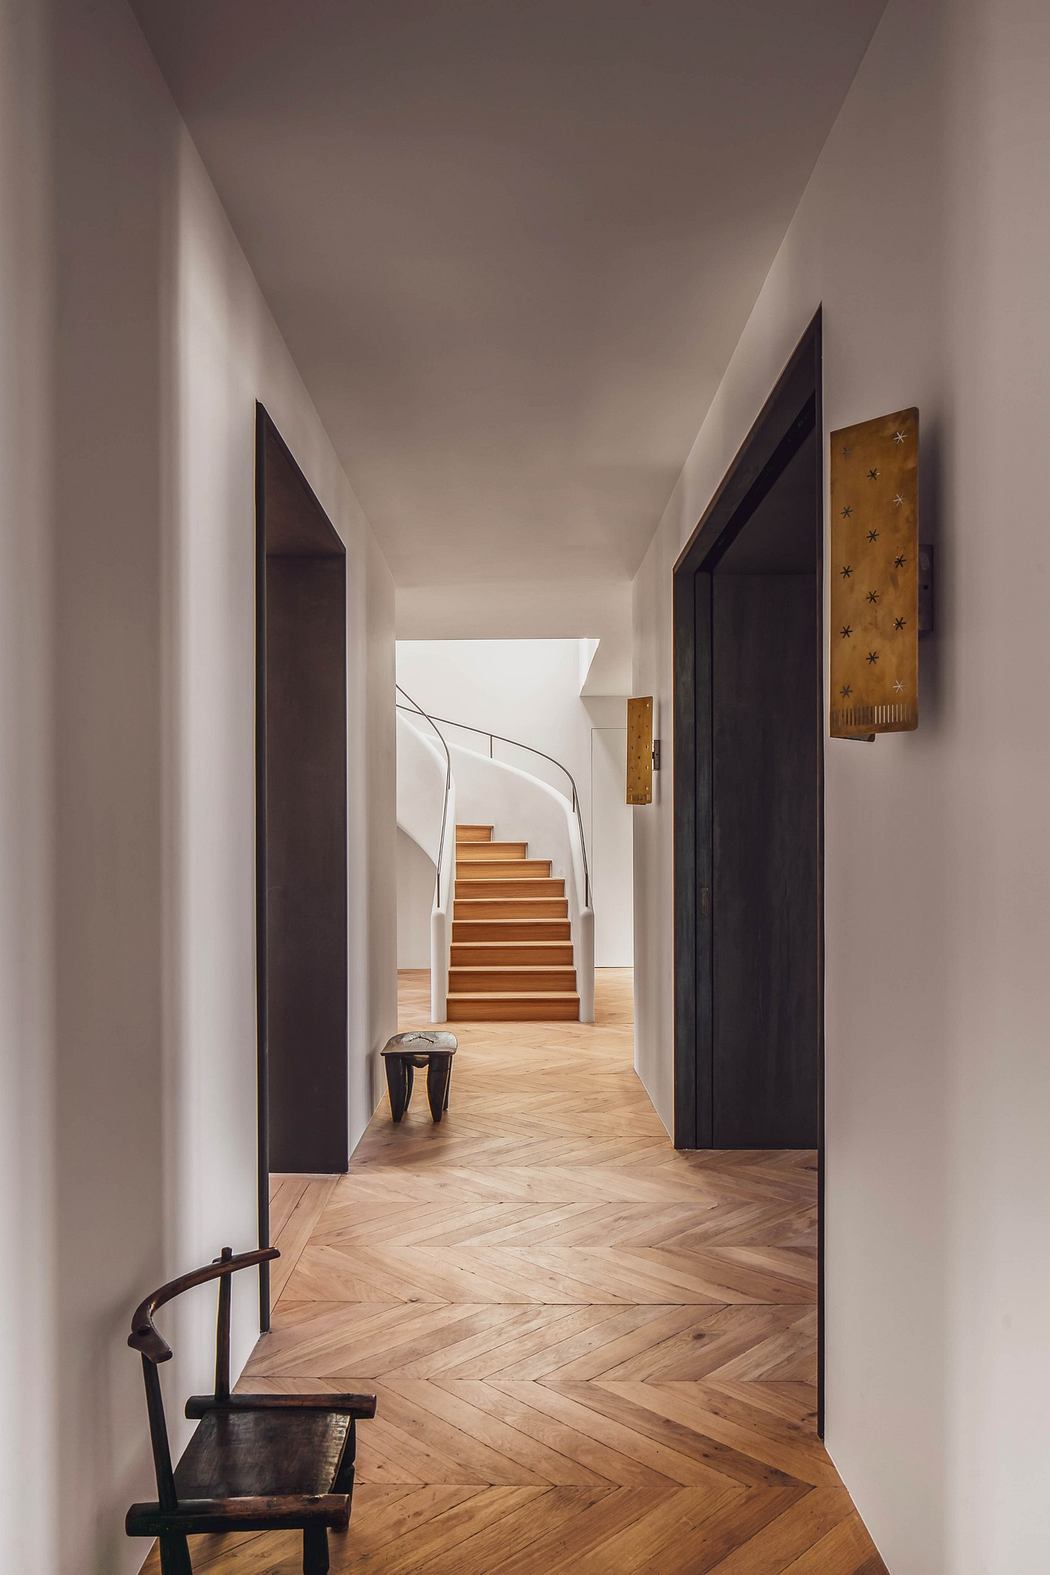 Elegant hallway with herringbone flooring leading to a curved staircase.